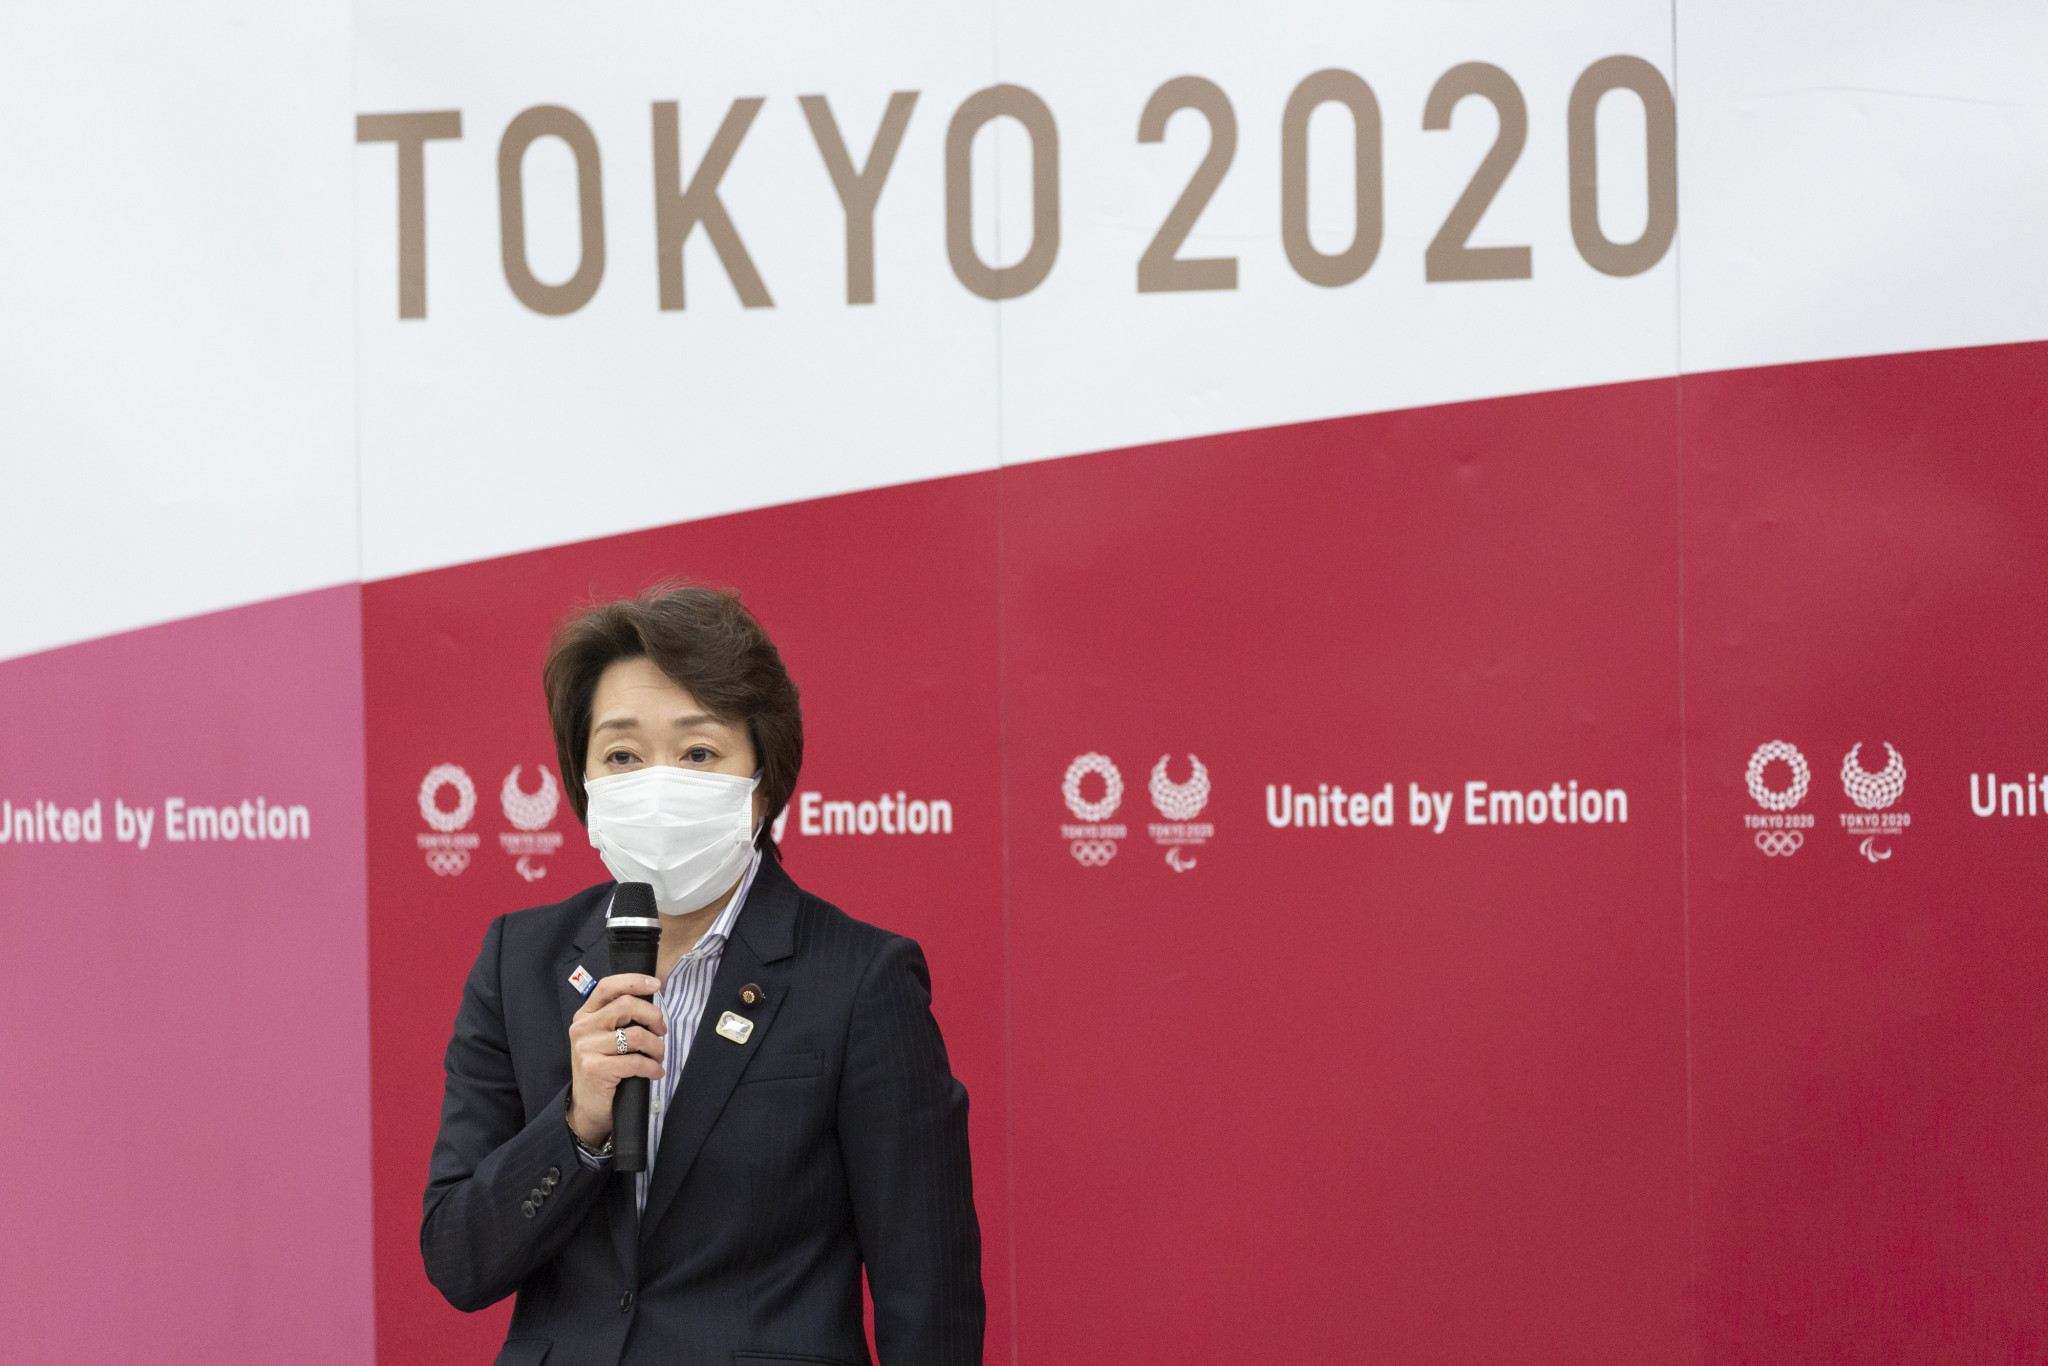 The head of the Tokyo 2020 Organising Committee Seiko Hashimoto has called for an increase in the number of women on the Tokyo 2020 Organising Committee Board ©Getty Images